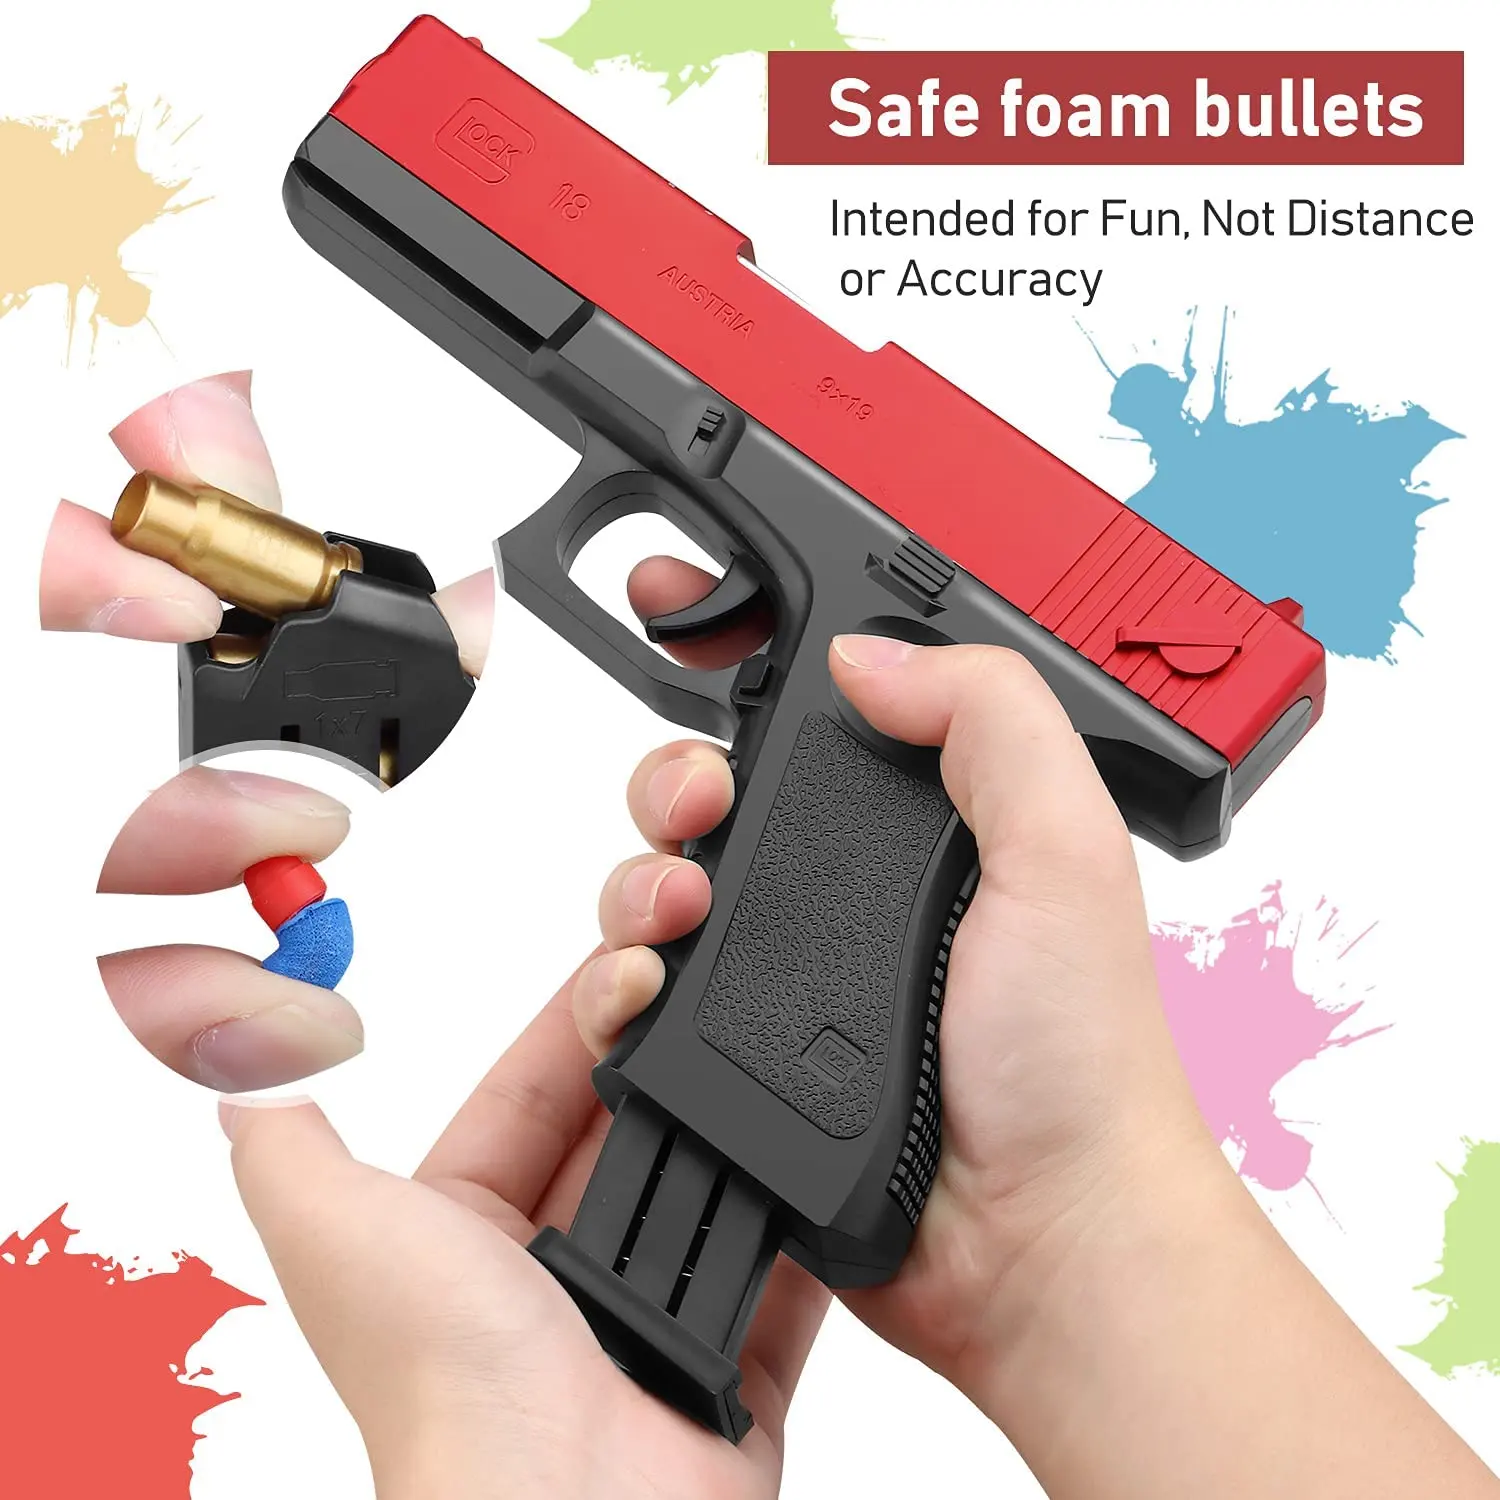 Toy guns for boys gifts over 6 years old manual pistol gun long range shootguns toy with foam bullets for kids